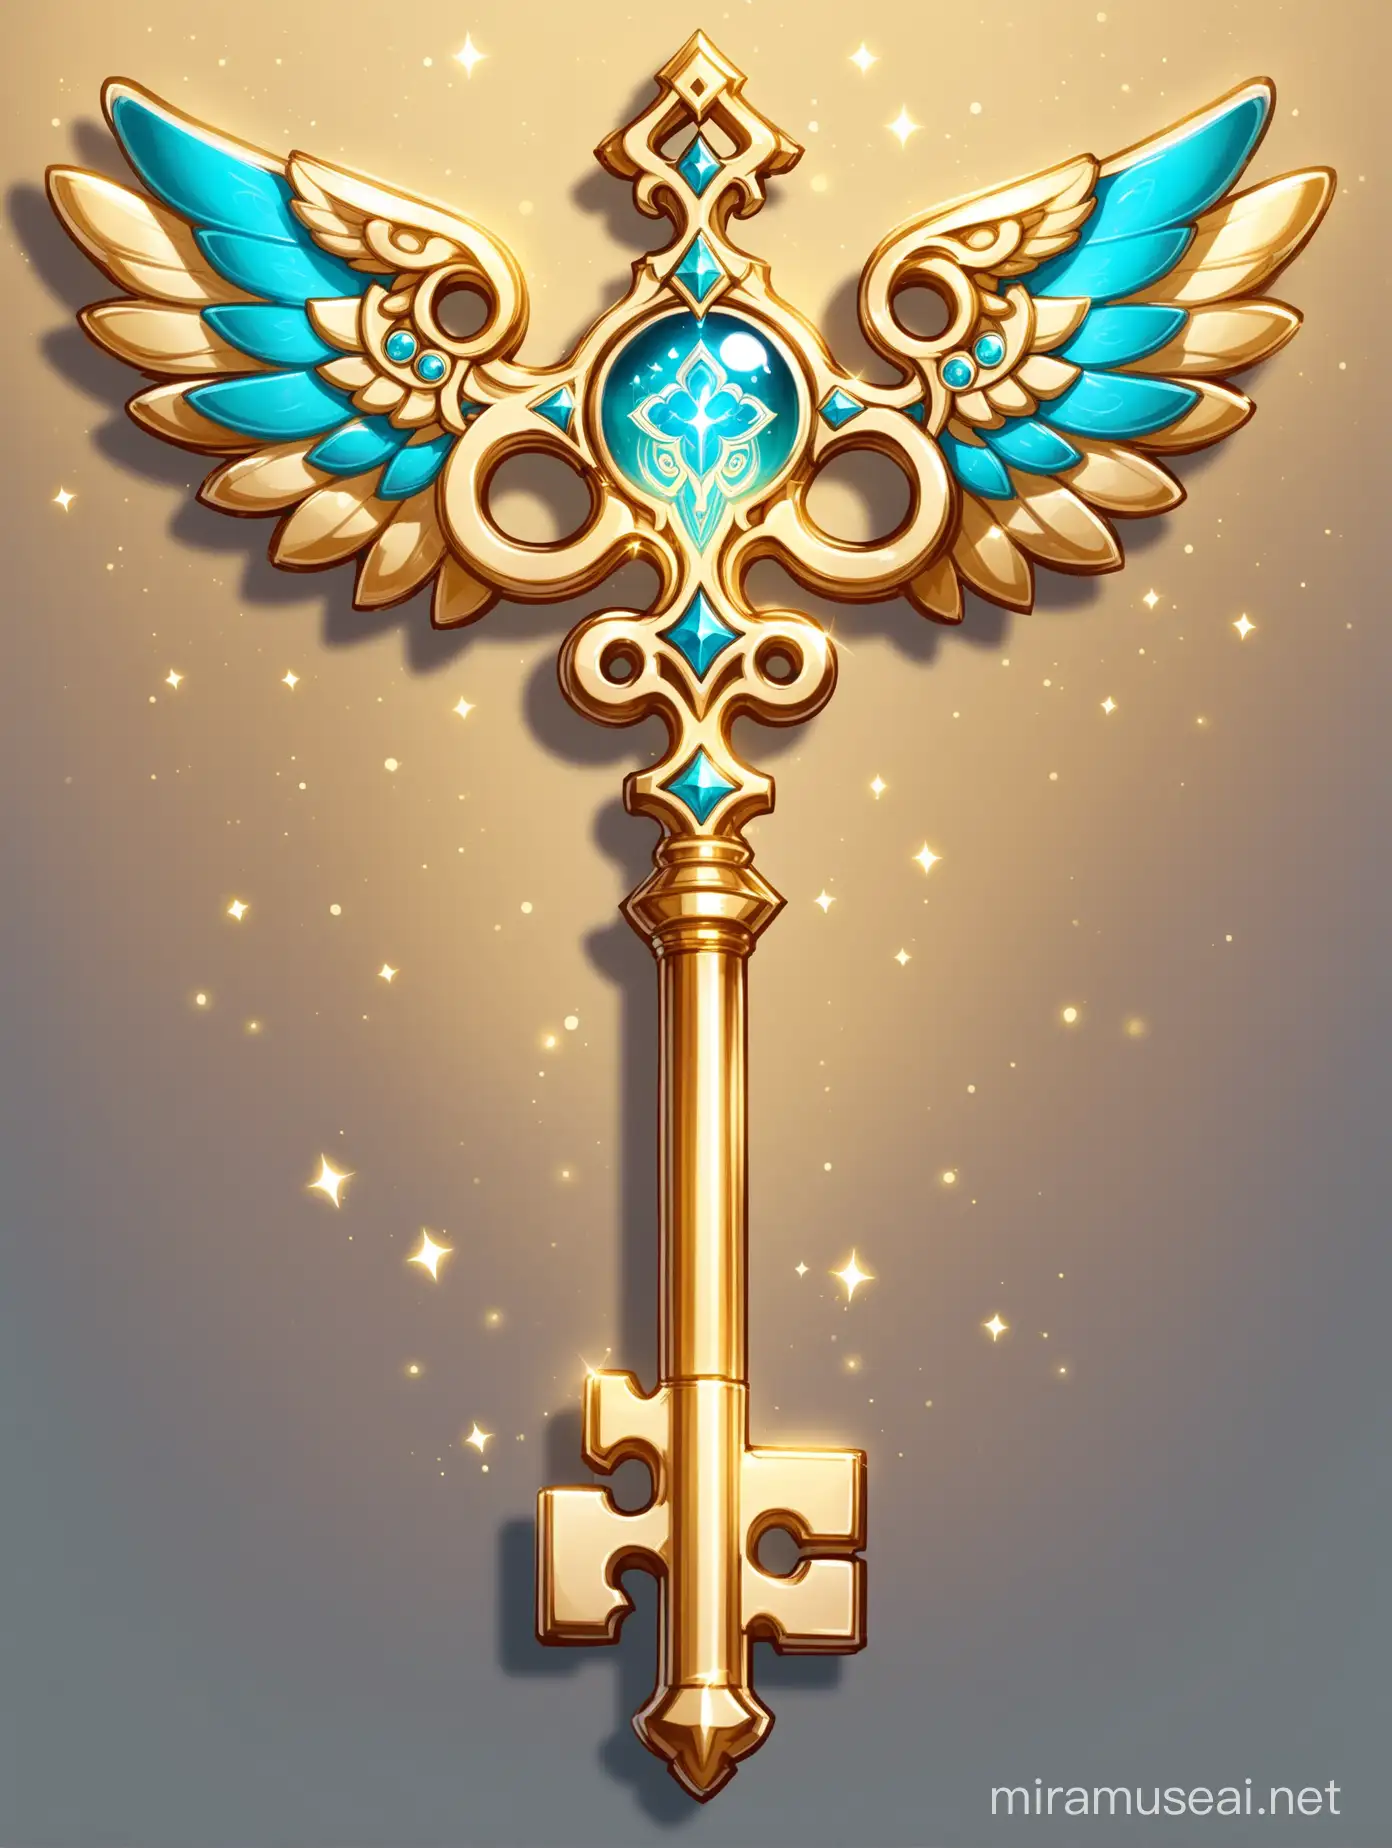 Make a golden key that has turqoise embedded designs within it. This key should look the like anemo gnosis from genshin impact. There is an angel wing attached to the side. This key radiates turqoise magic.